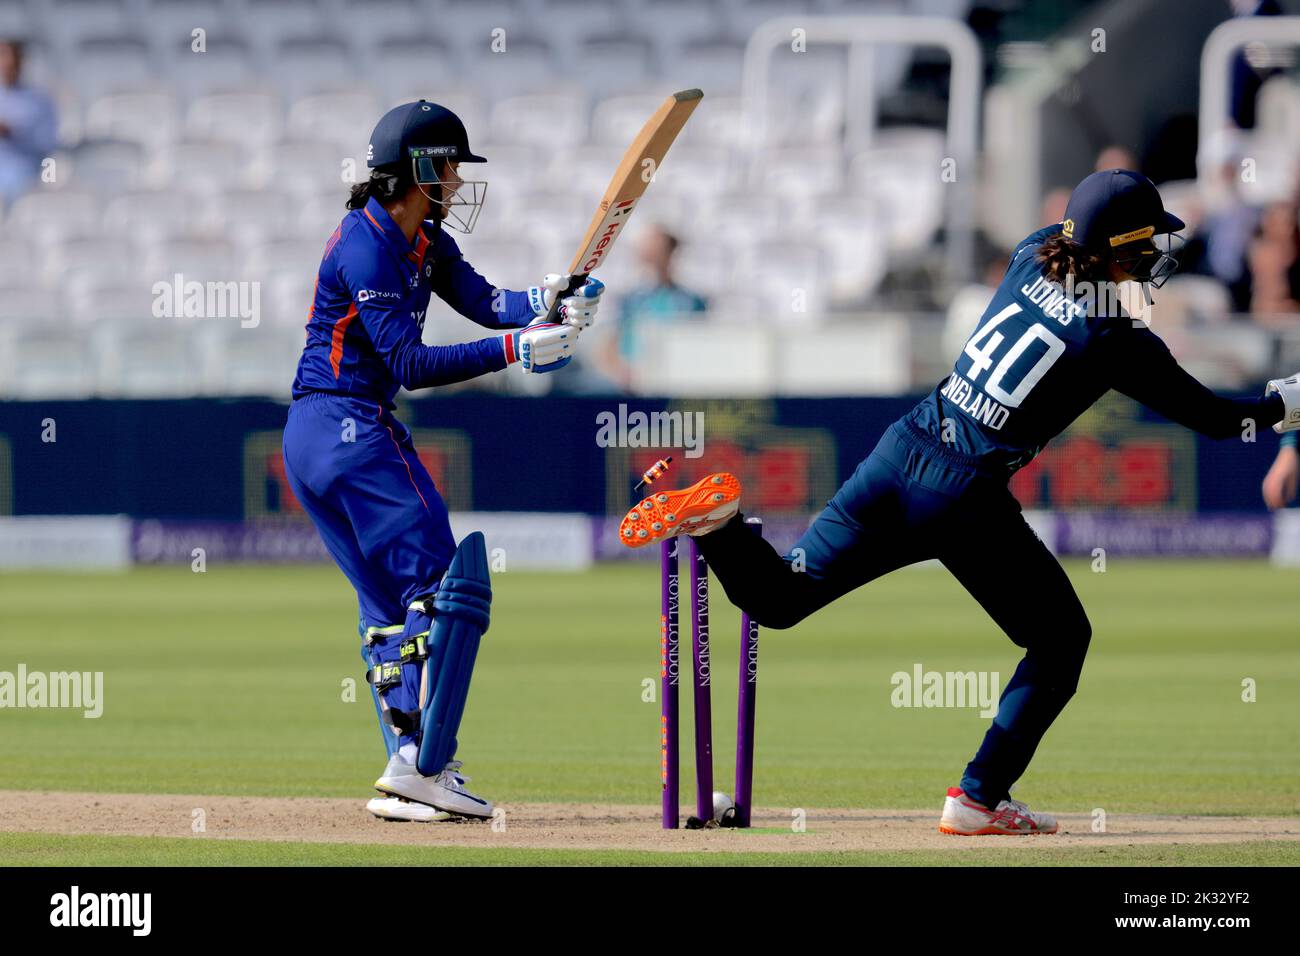 London, UK. 24 September 2022.  England’s Kate Cross gets the wicket  of Smriti MandhanaEngland women take on India in the 3rd Royal London One Day International at Lords. David Rowe/Alamy Live News. Stock Photo